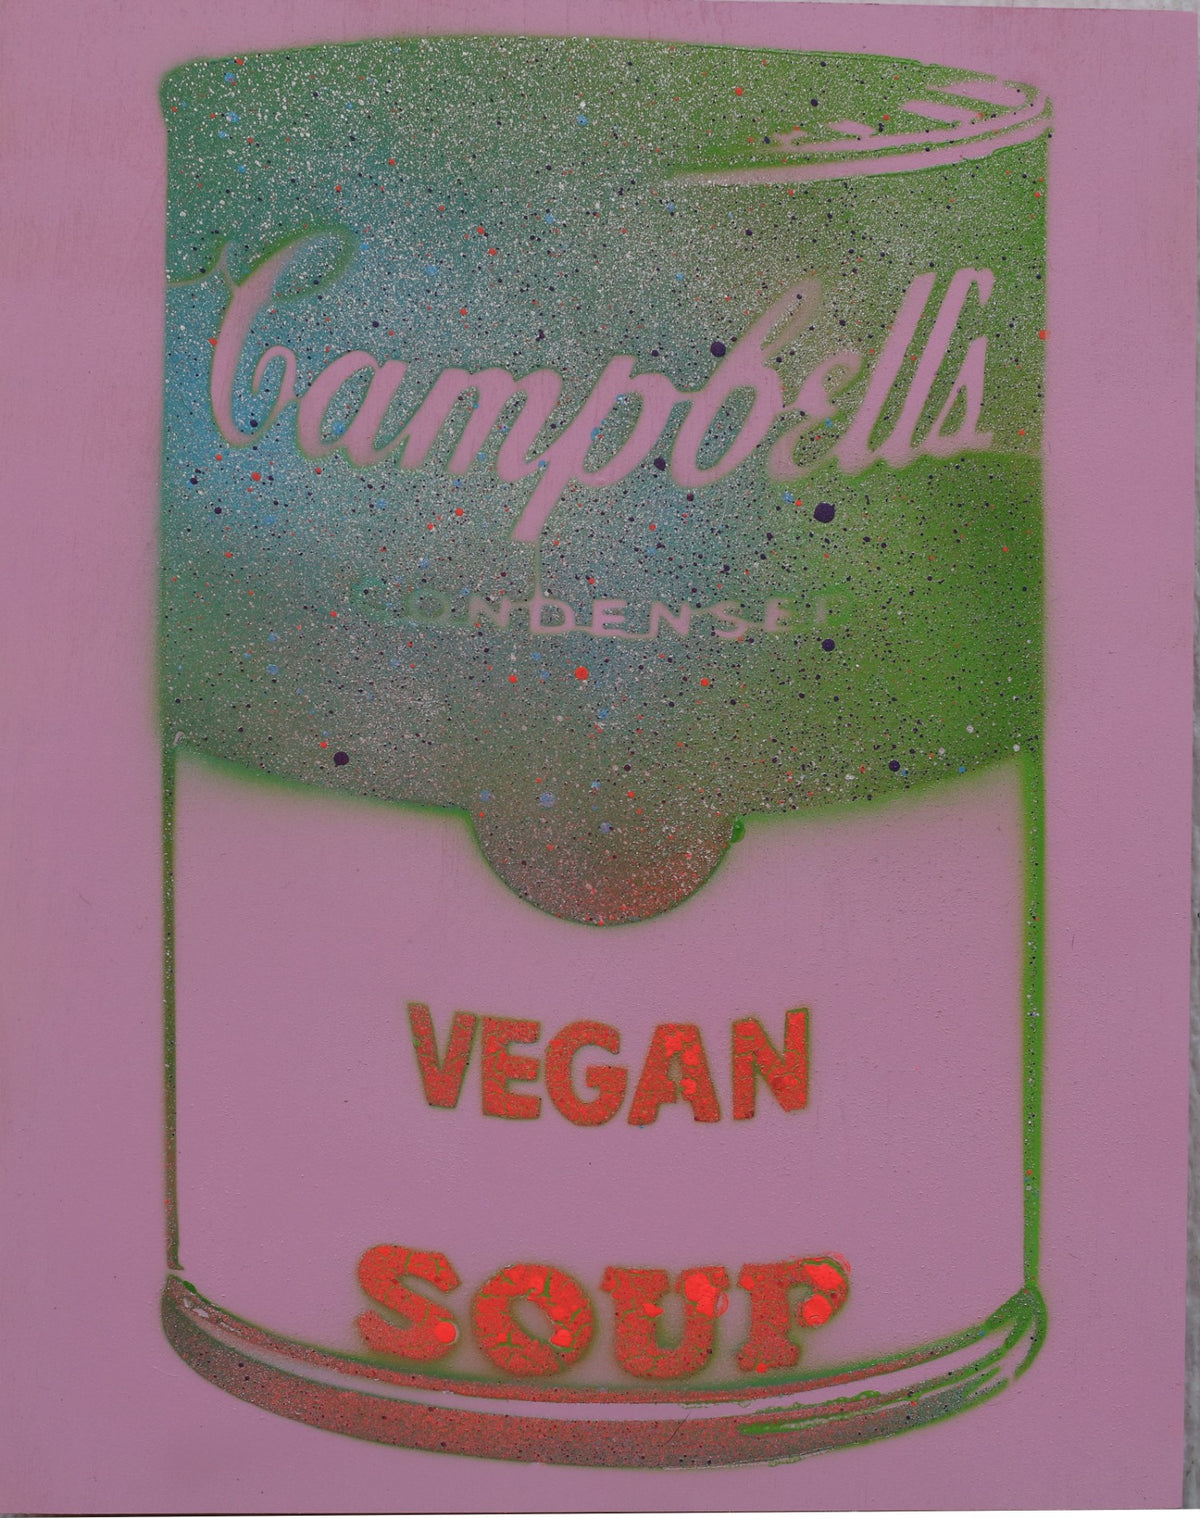 Vegan Soup Light Purple, Red & Green on Wood and Resin 14x11 (Original Sold - Only Prints Available)